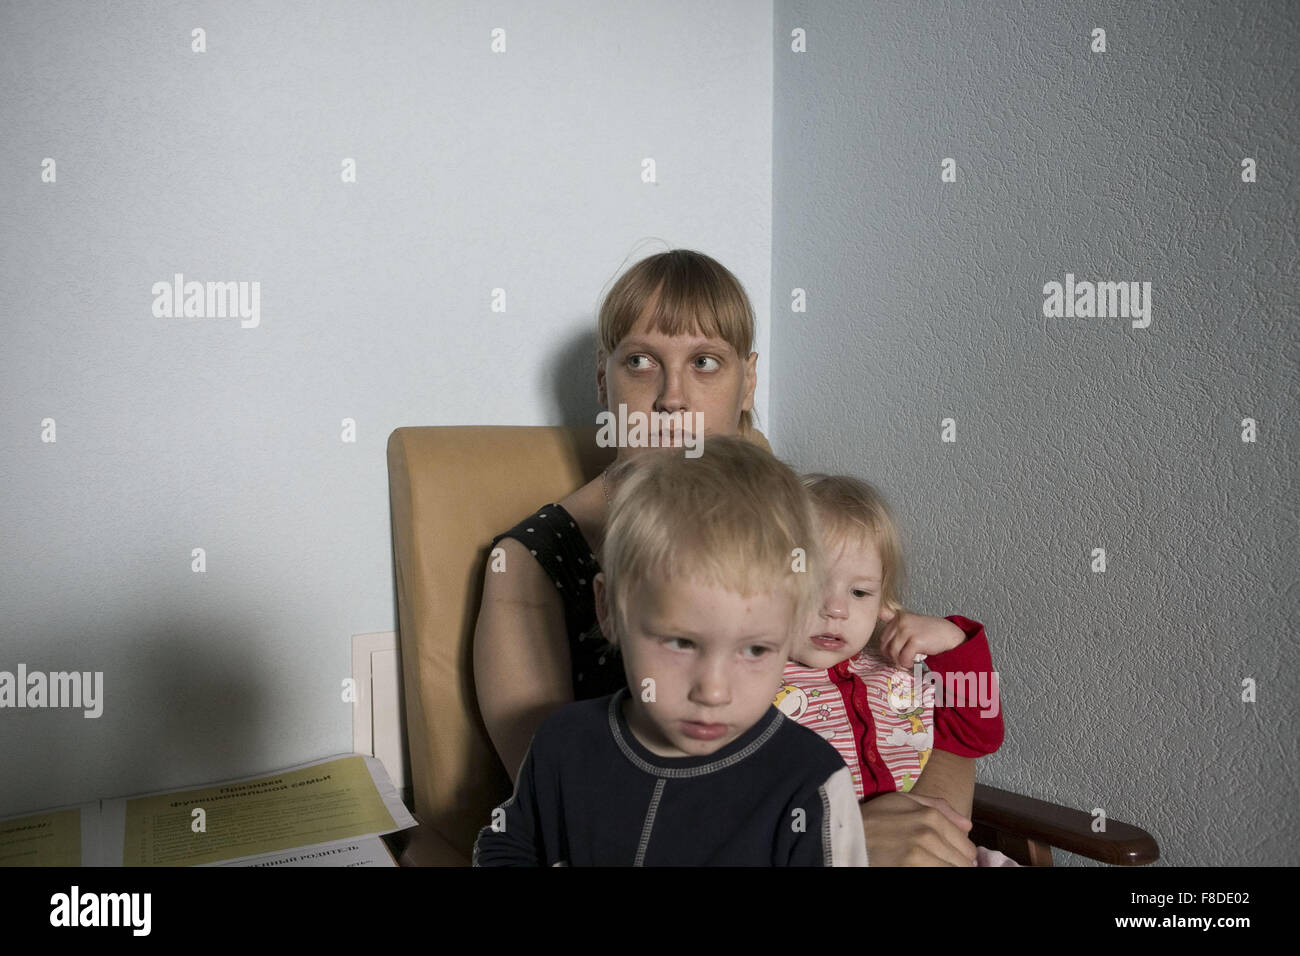 June 10, 2015 - Tomsk, Western Siberia, Russia - A mother with her children attending a psicological consulting meeting at the Family Center opened in 2000. Two psicologists look after them. Single and divorced women with their husbands, addicted to alcohol or jobless, attend the Family center. Women do not have a higher education. The educational attainment level of the household head is strongly correlated with poverty. Caritas provides used clothes and food to them.They do the shopping with the mothers to teach them how to save up. Some single women work, others have a steady job with a low Stock Photo